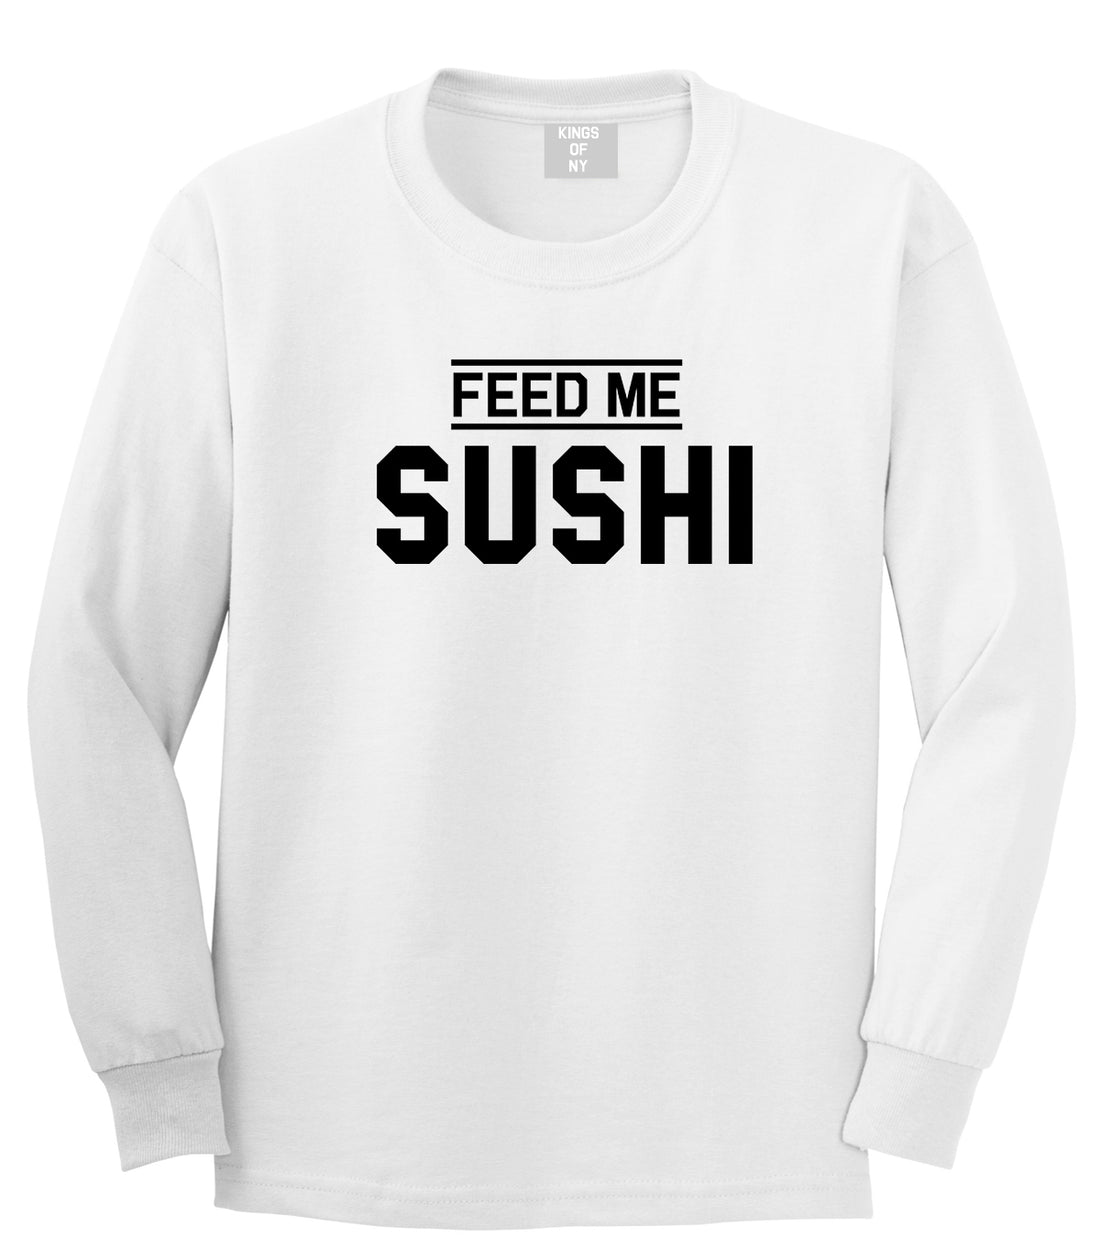 Feed Me Sushi Mens White Long Sleeve T-Shirt by KINGS OF NY